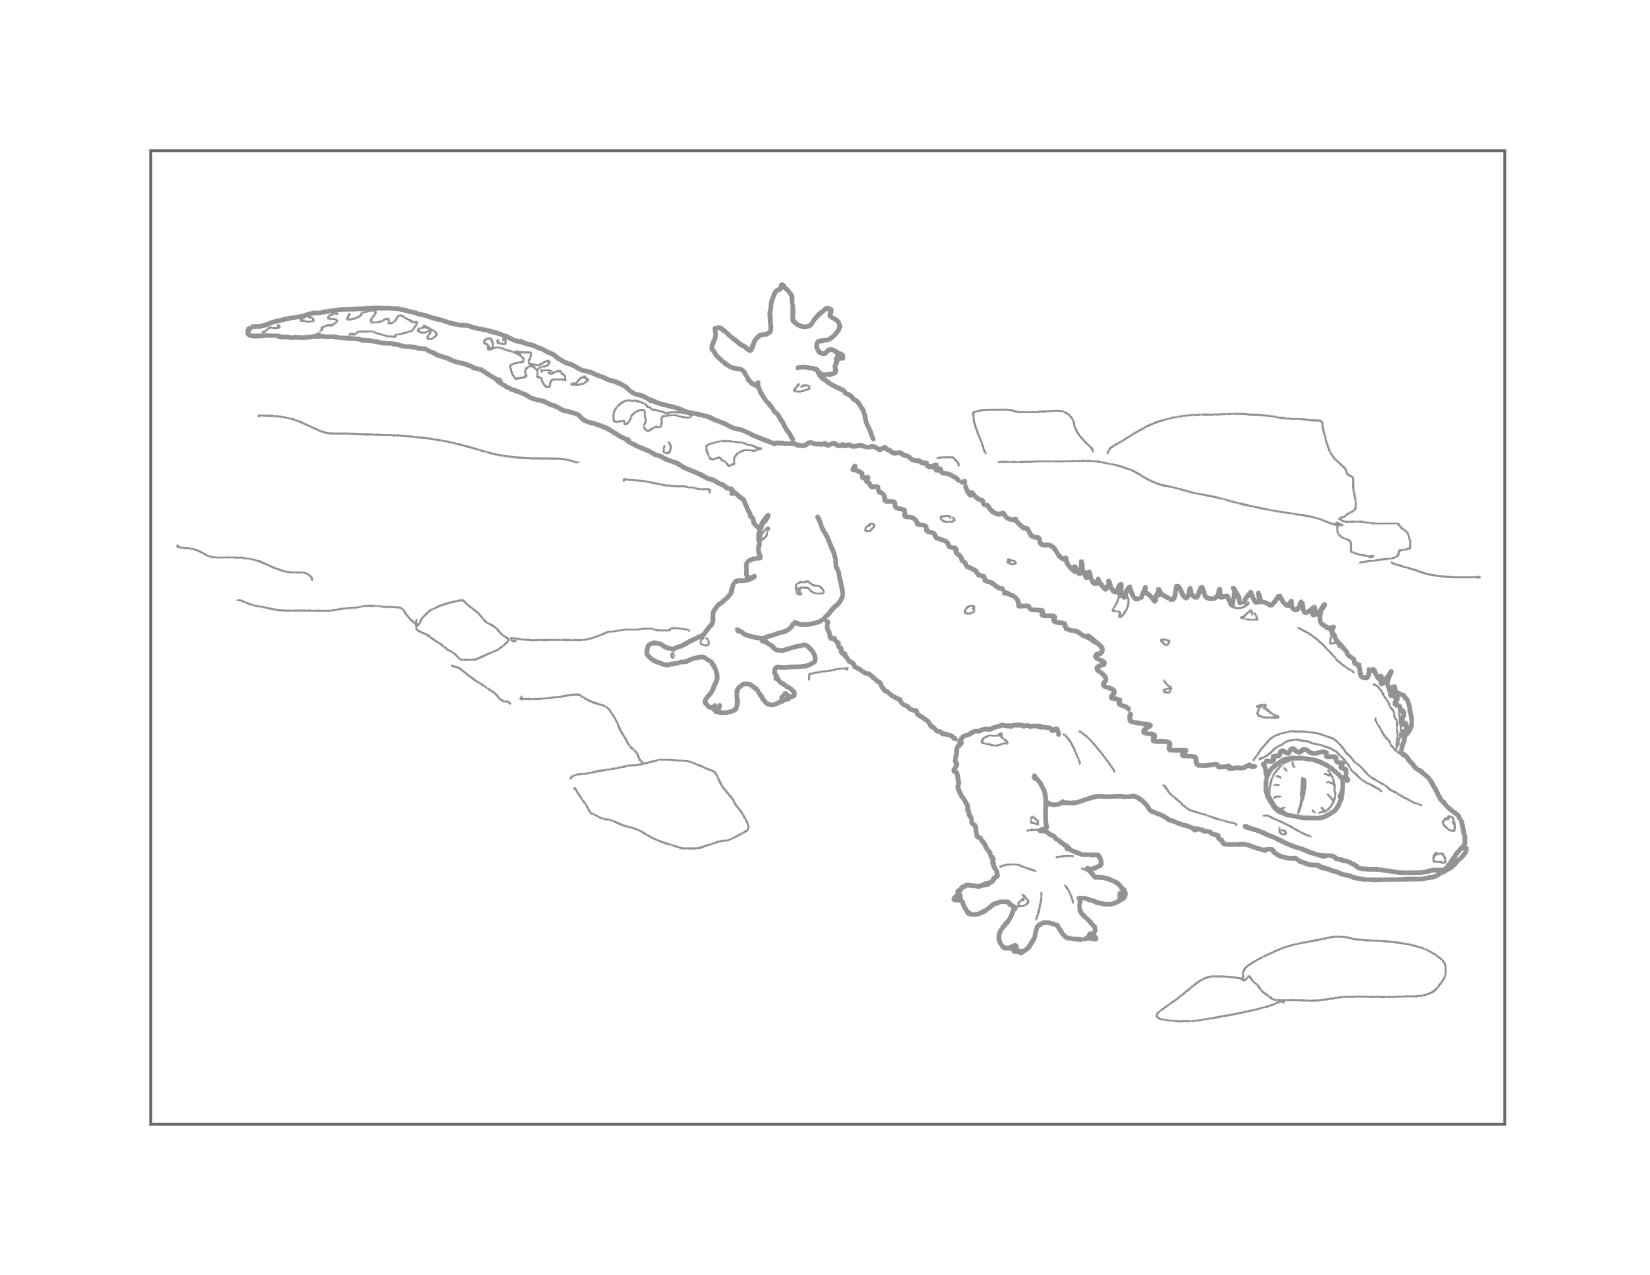 Crested Gecko Traceable Coloring Page